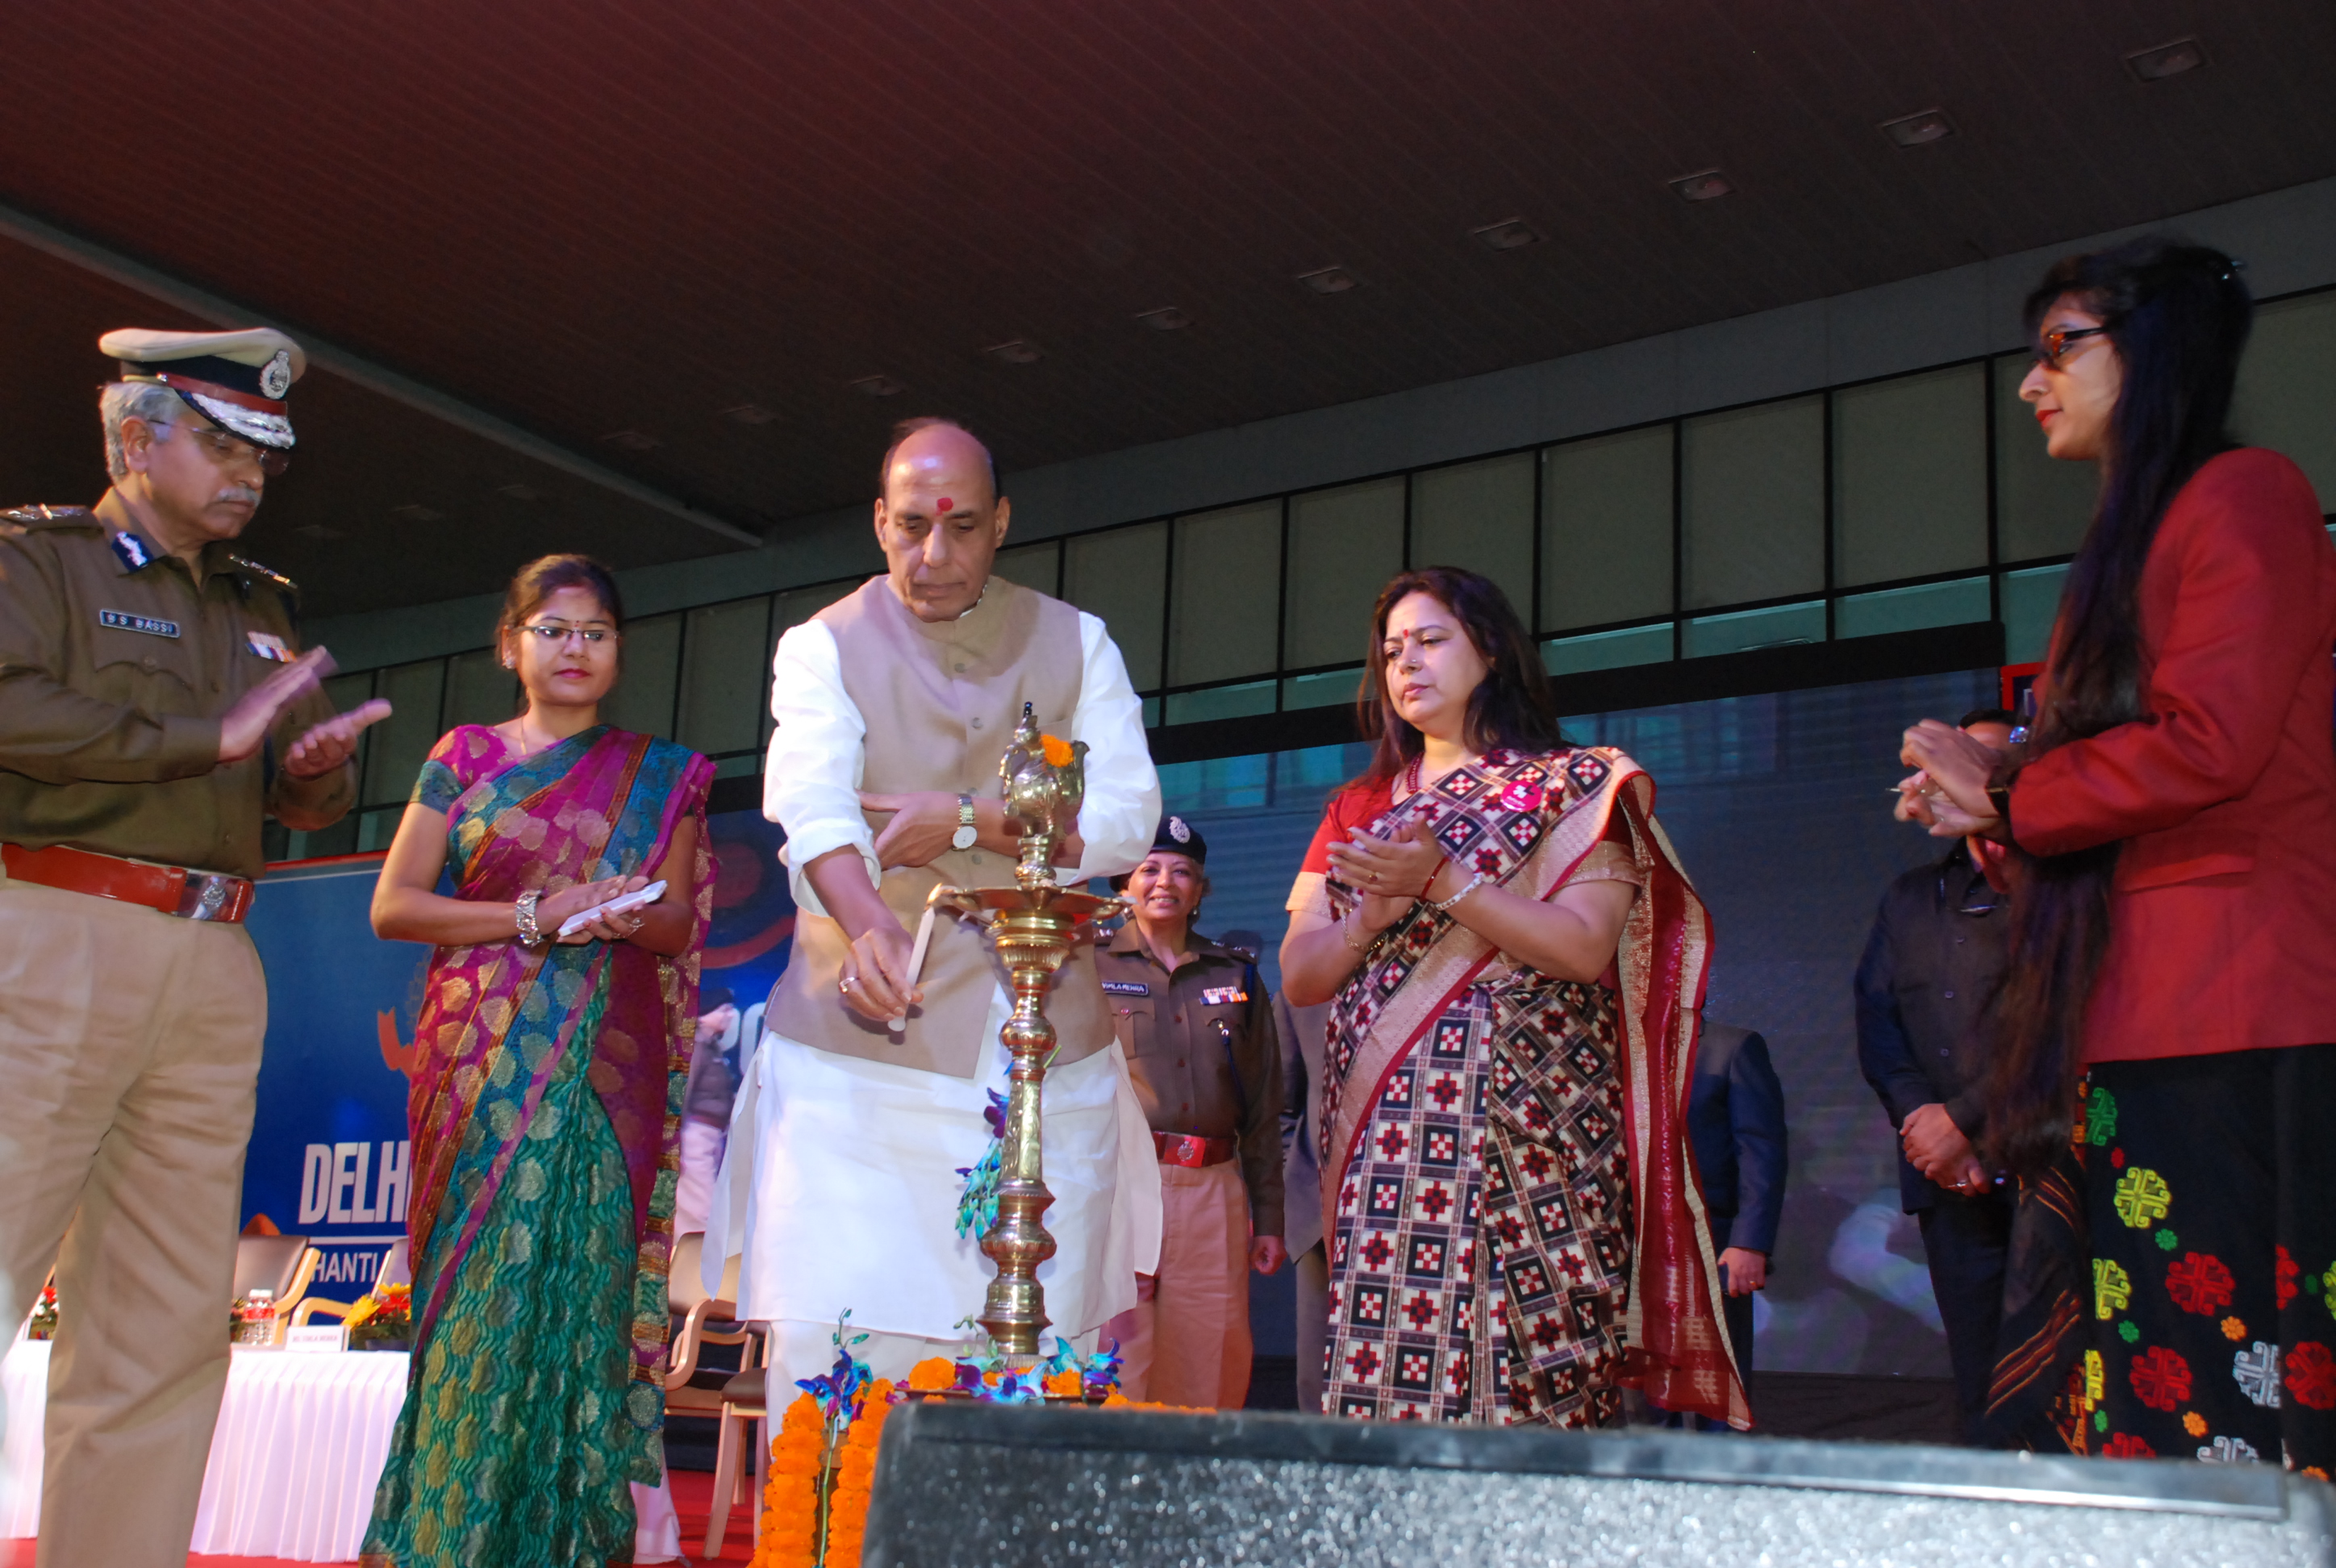 "SAY NO TO FEAR" SELF DEFENCE PROGRAM BY DELHI POLICE INAUGRATED BY THE HONB'LE UNION HOME MINISTER RAJNATH SINGH